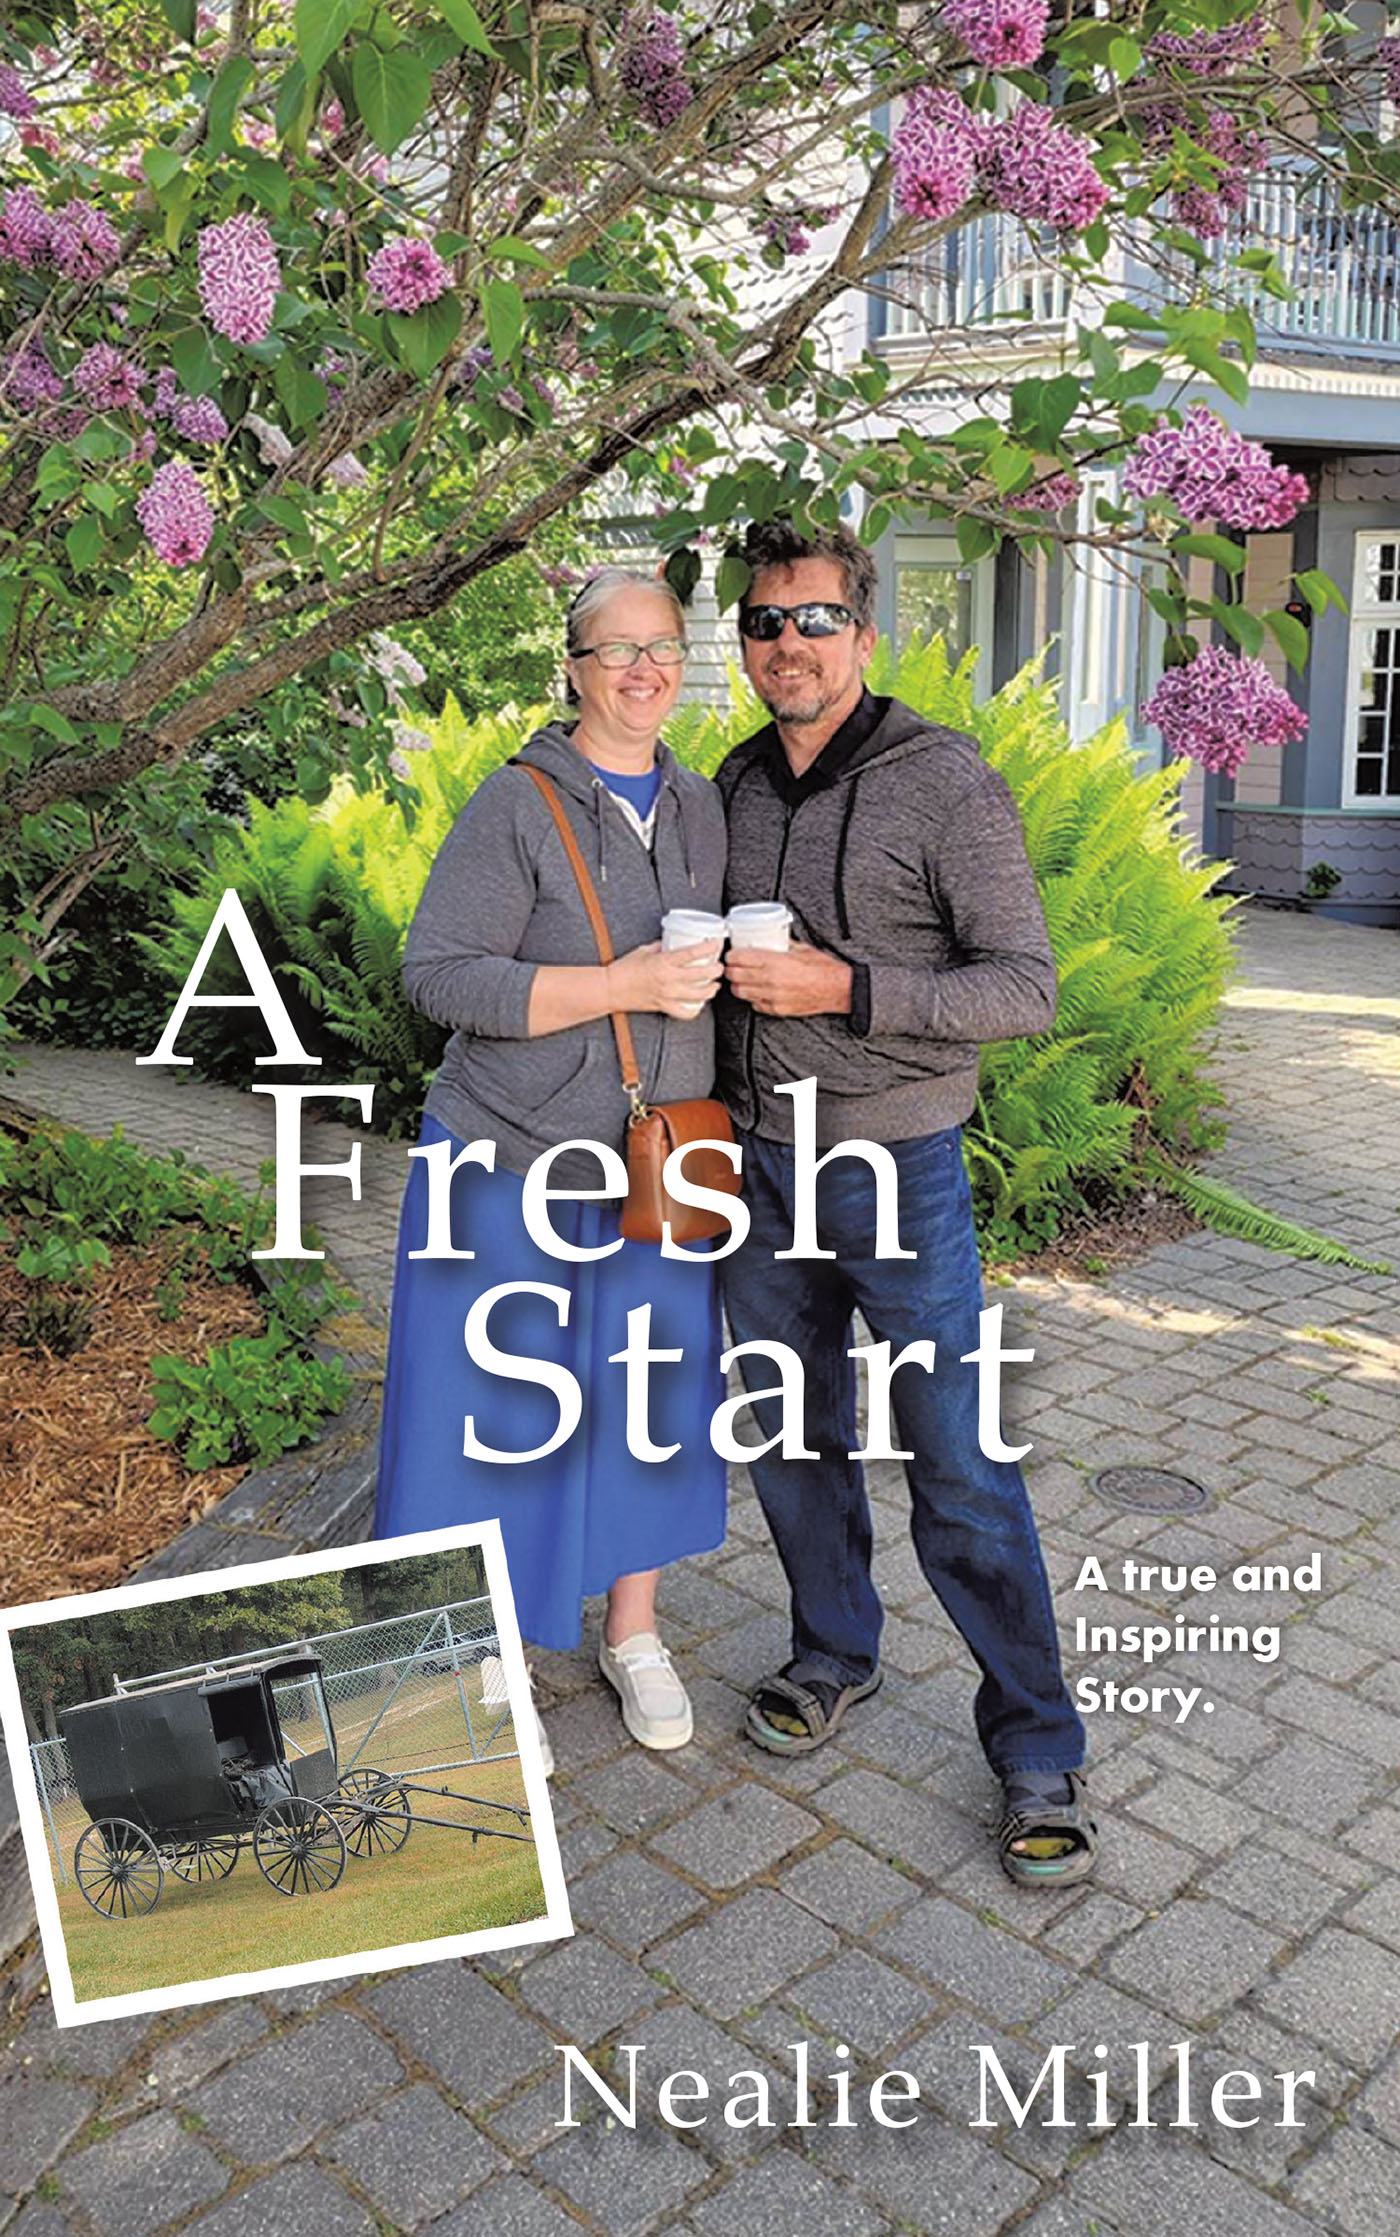 Author Nealie Miller’s New Book, "A Fresh Start," Follows the Story of a Family Who Ends Up with Nothing, Only to be Blessed with the Chance for a New Start Through God